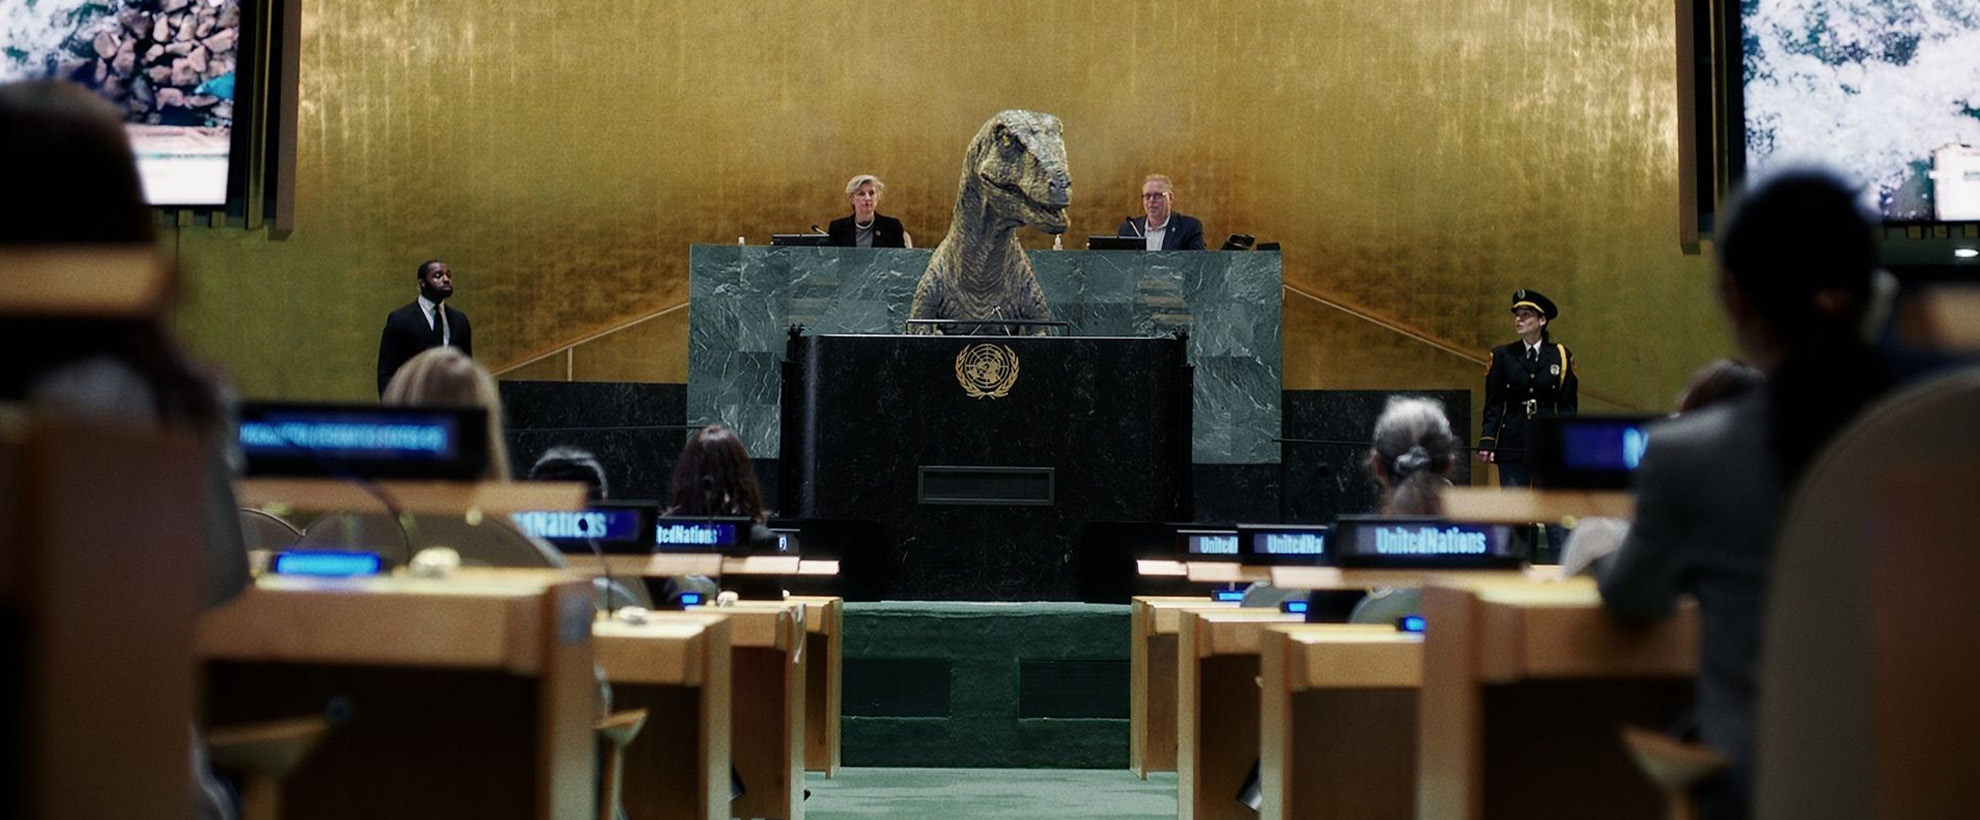 A United Nations panel with multiple people at desks with headsets, there is a velociraptor at the front of the room at a lecturn.